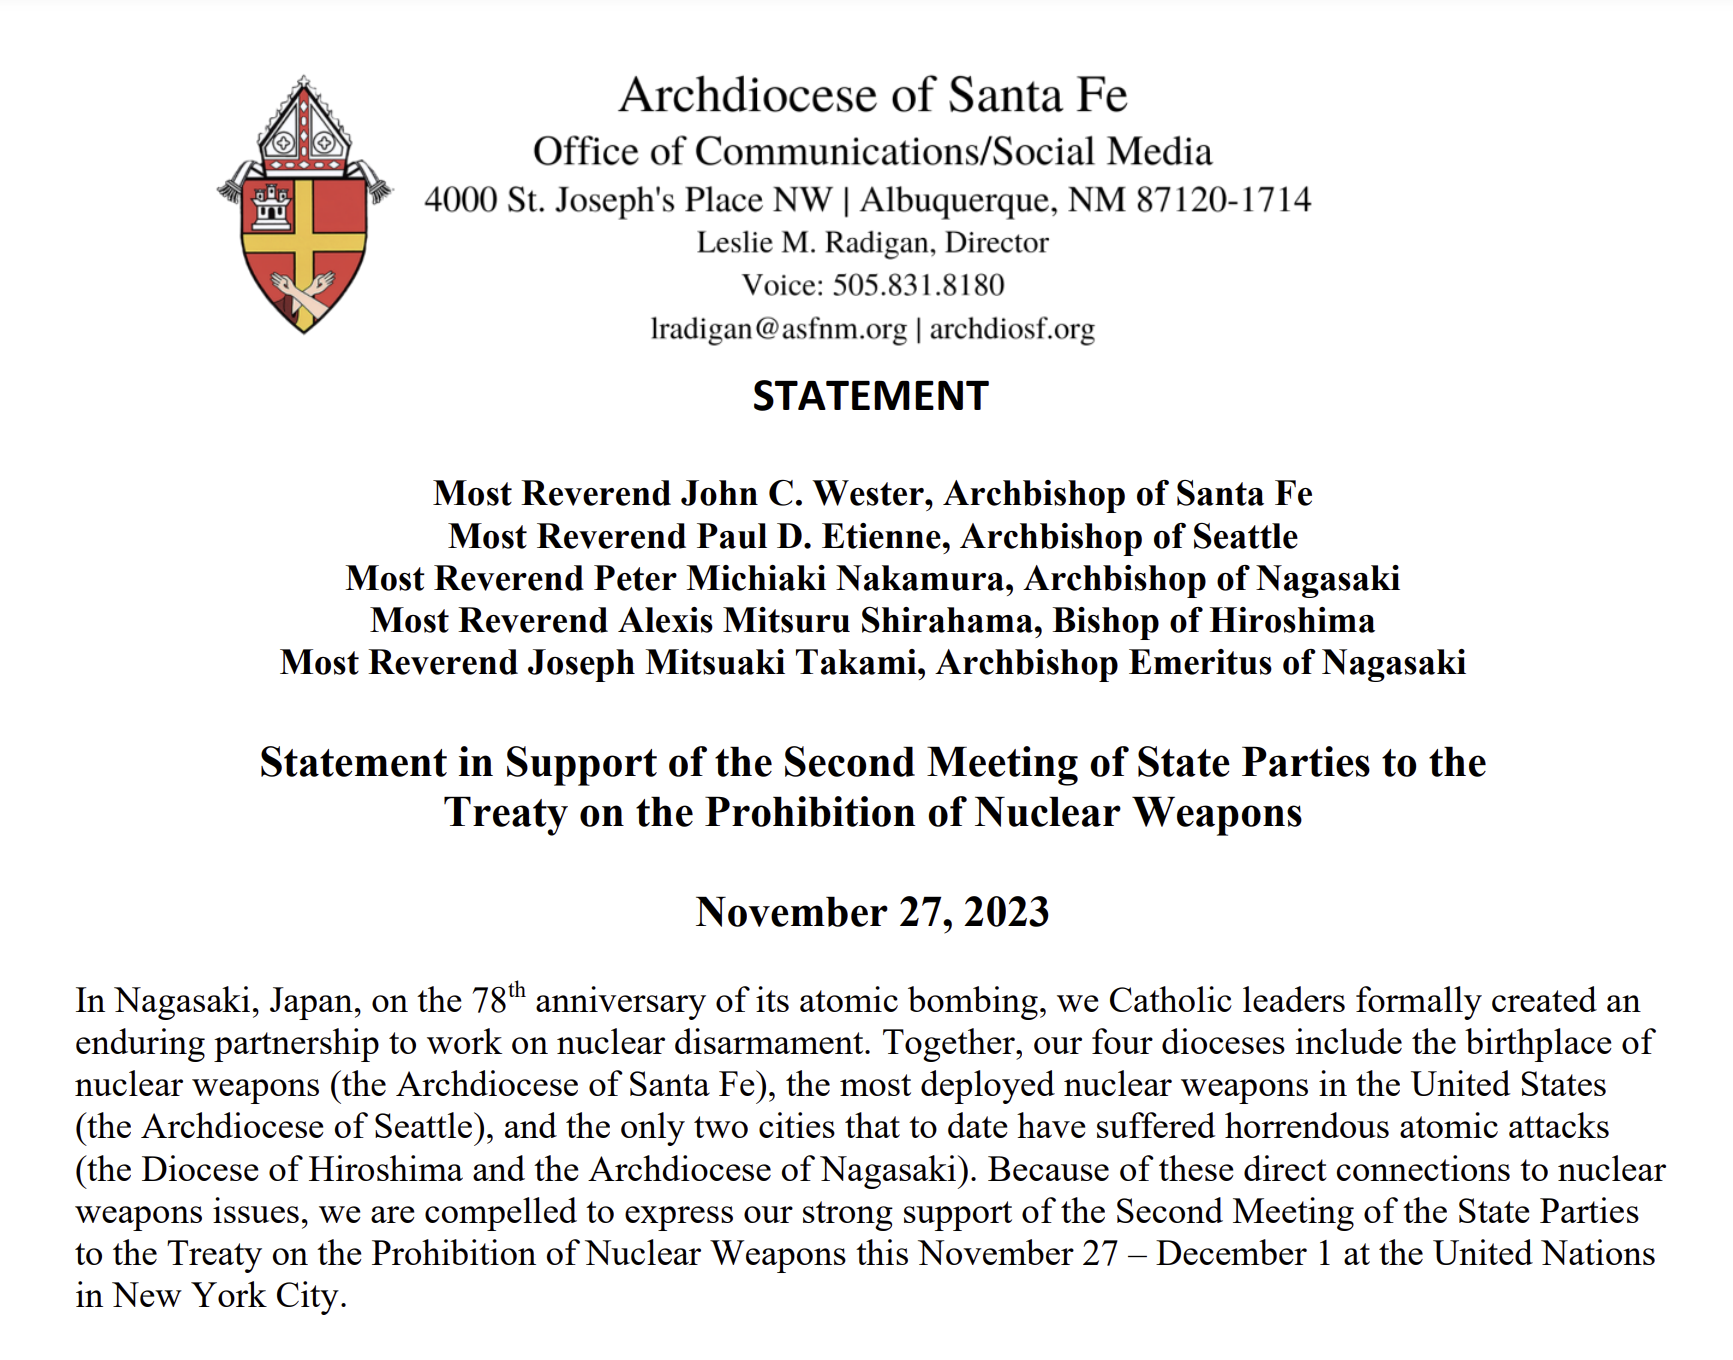 Archdioceses of Santa Fe, Seattle, Nagasaki and Diocese of Hiroshima: Statement in Support of the Second Meeting of State Parties to the TPNW